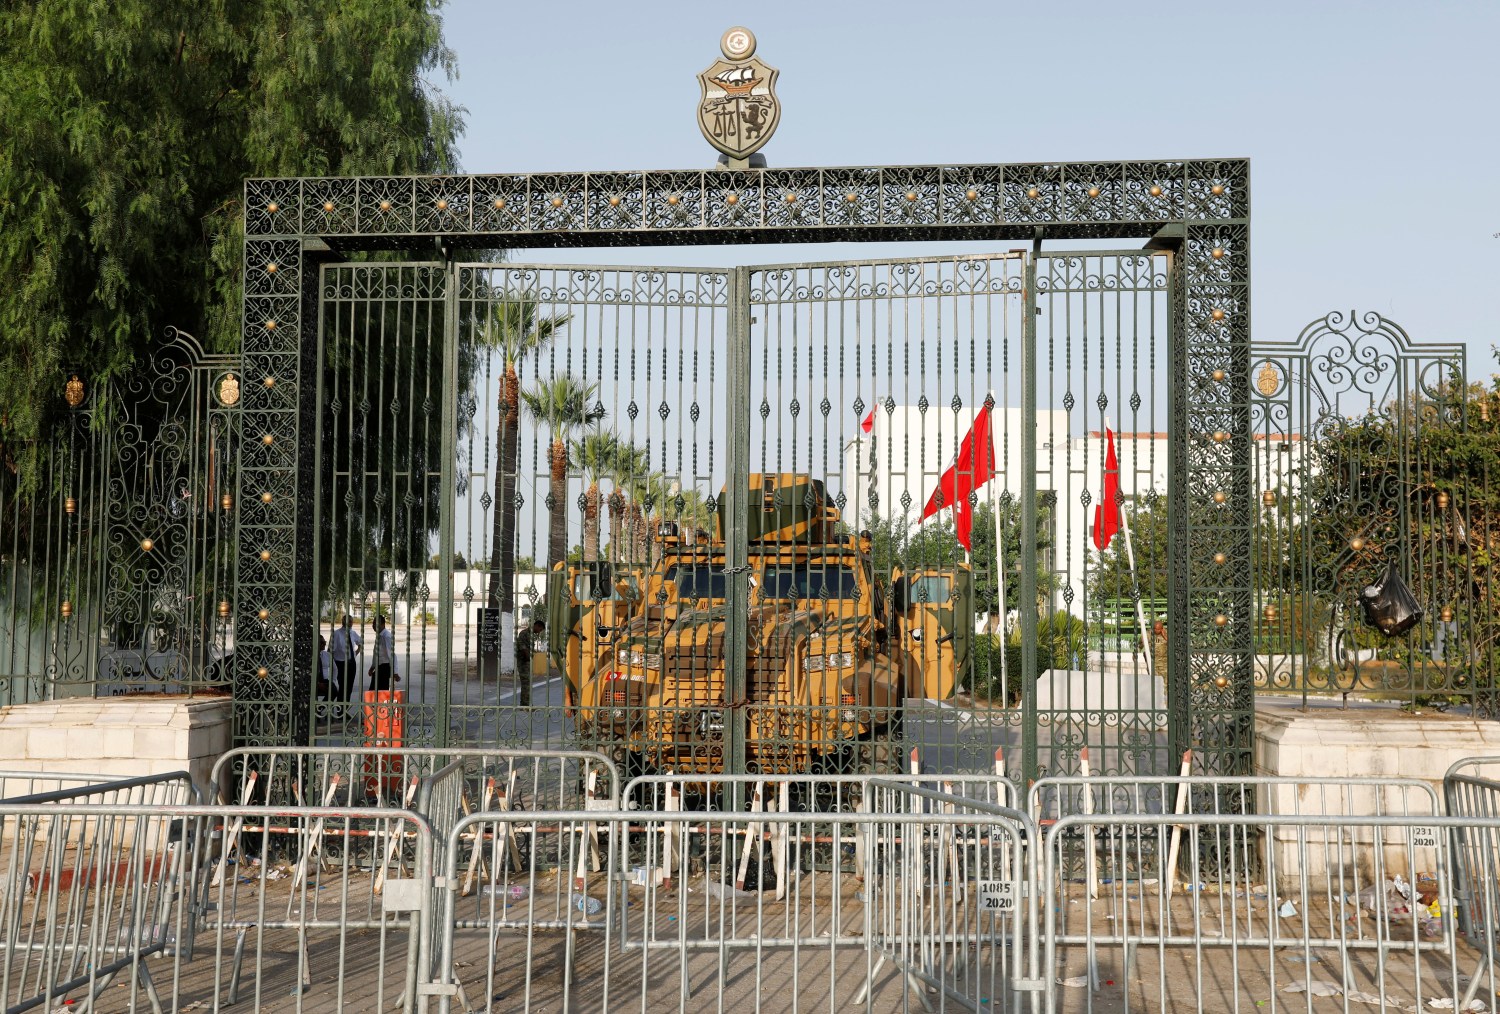 A military vehicle is pictured in front of the parliament building in Tunis, Tunisia  July 26, 2021. REUTERS/Zoubeir Souissi